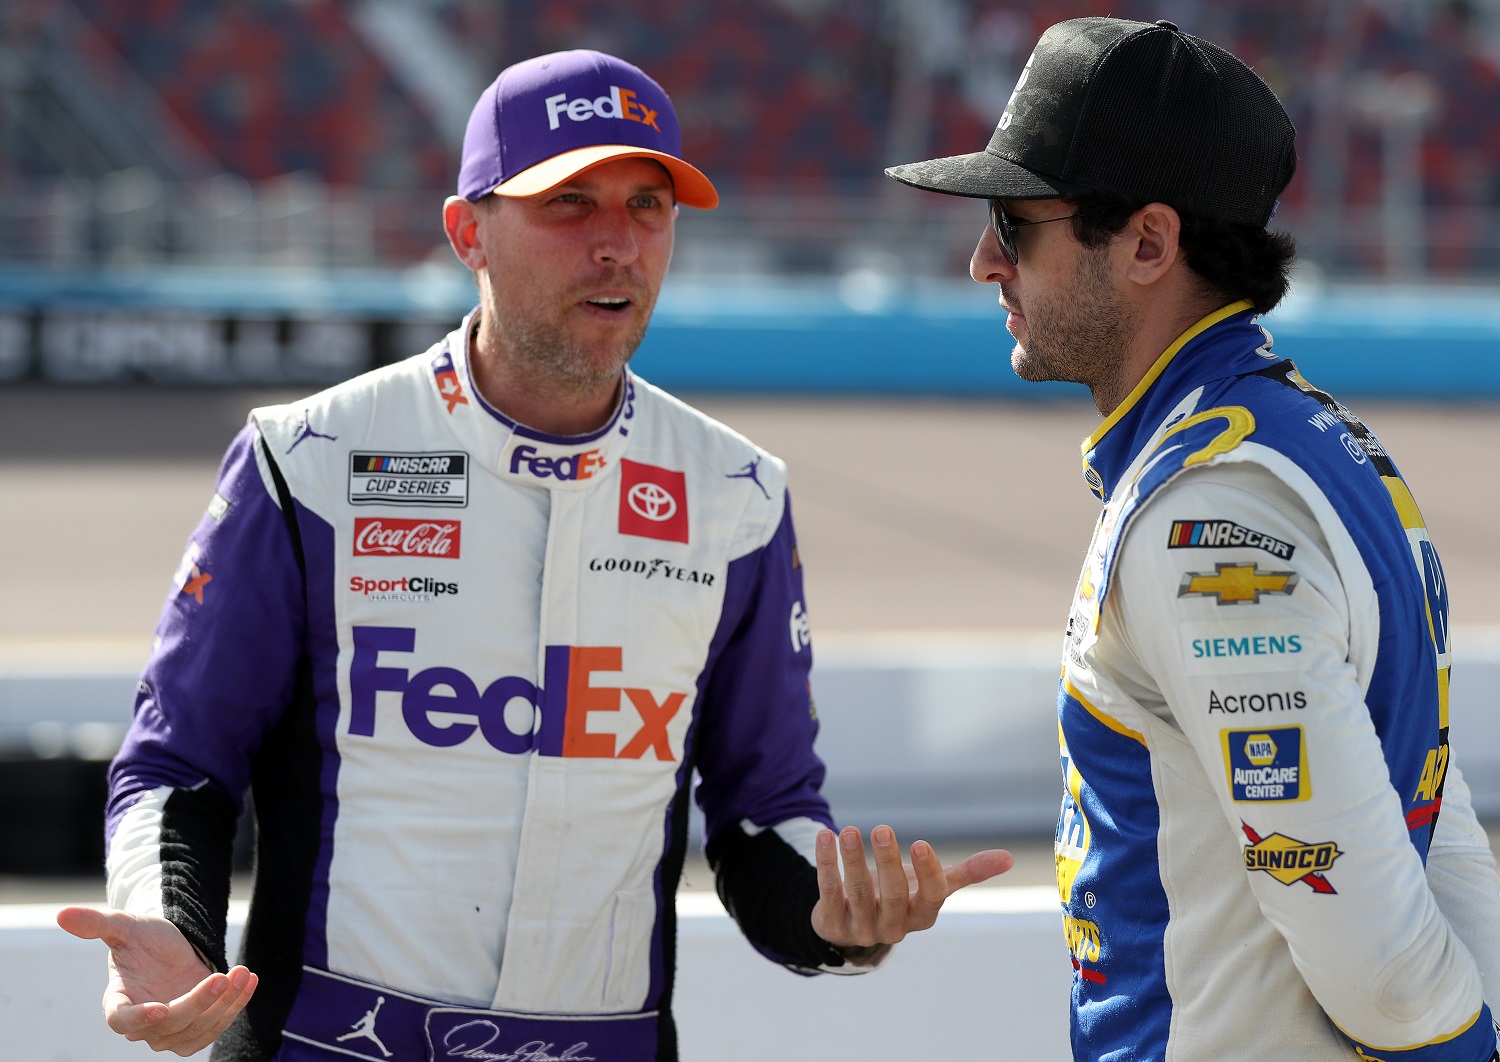 Denny Hamlin, left, talks with Chase Elliott during qualifying for the NASCAR Cup Series Championship at Phoenix Raceway on Nov. 5, 2022. | Meg Oliphant/Getty Images